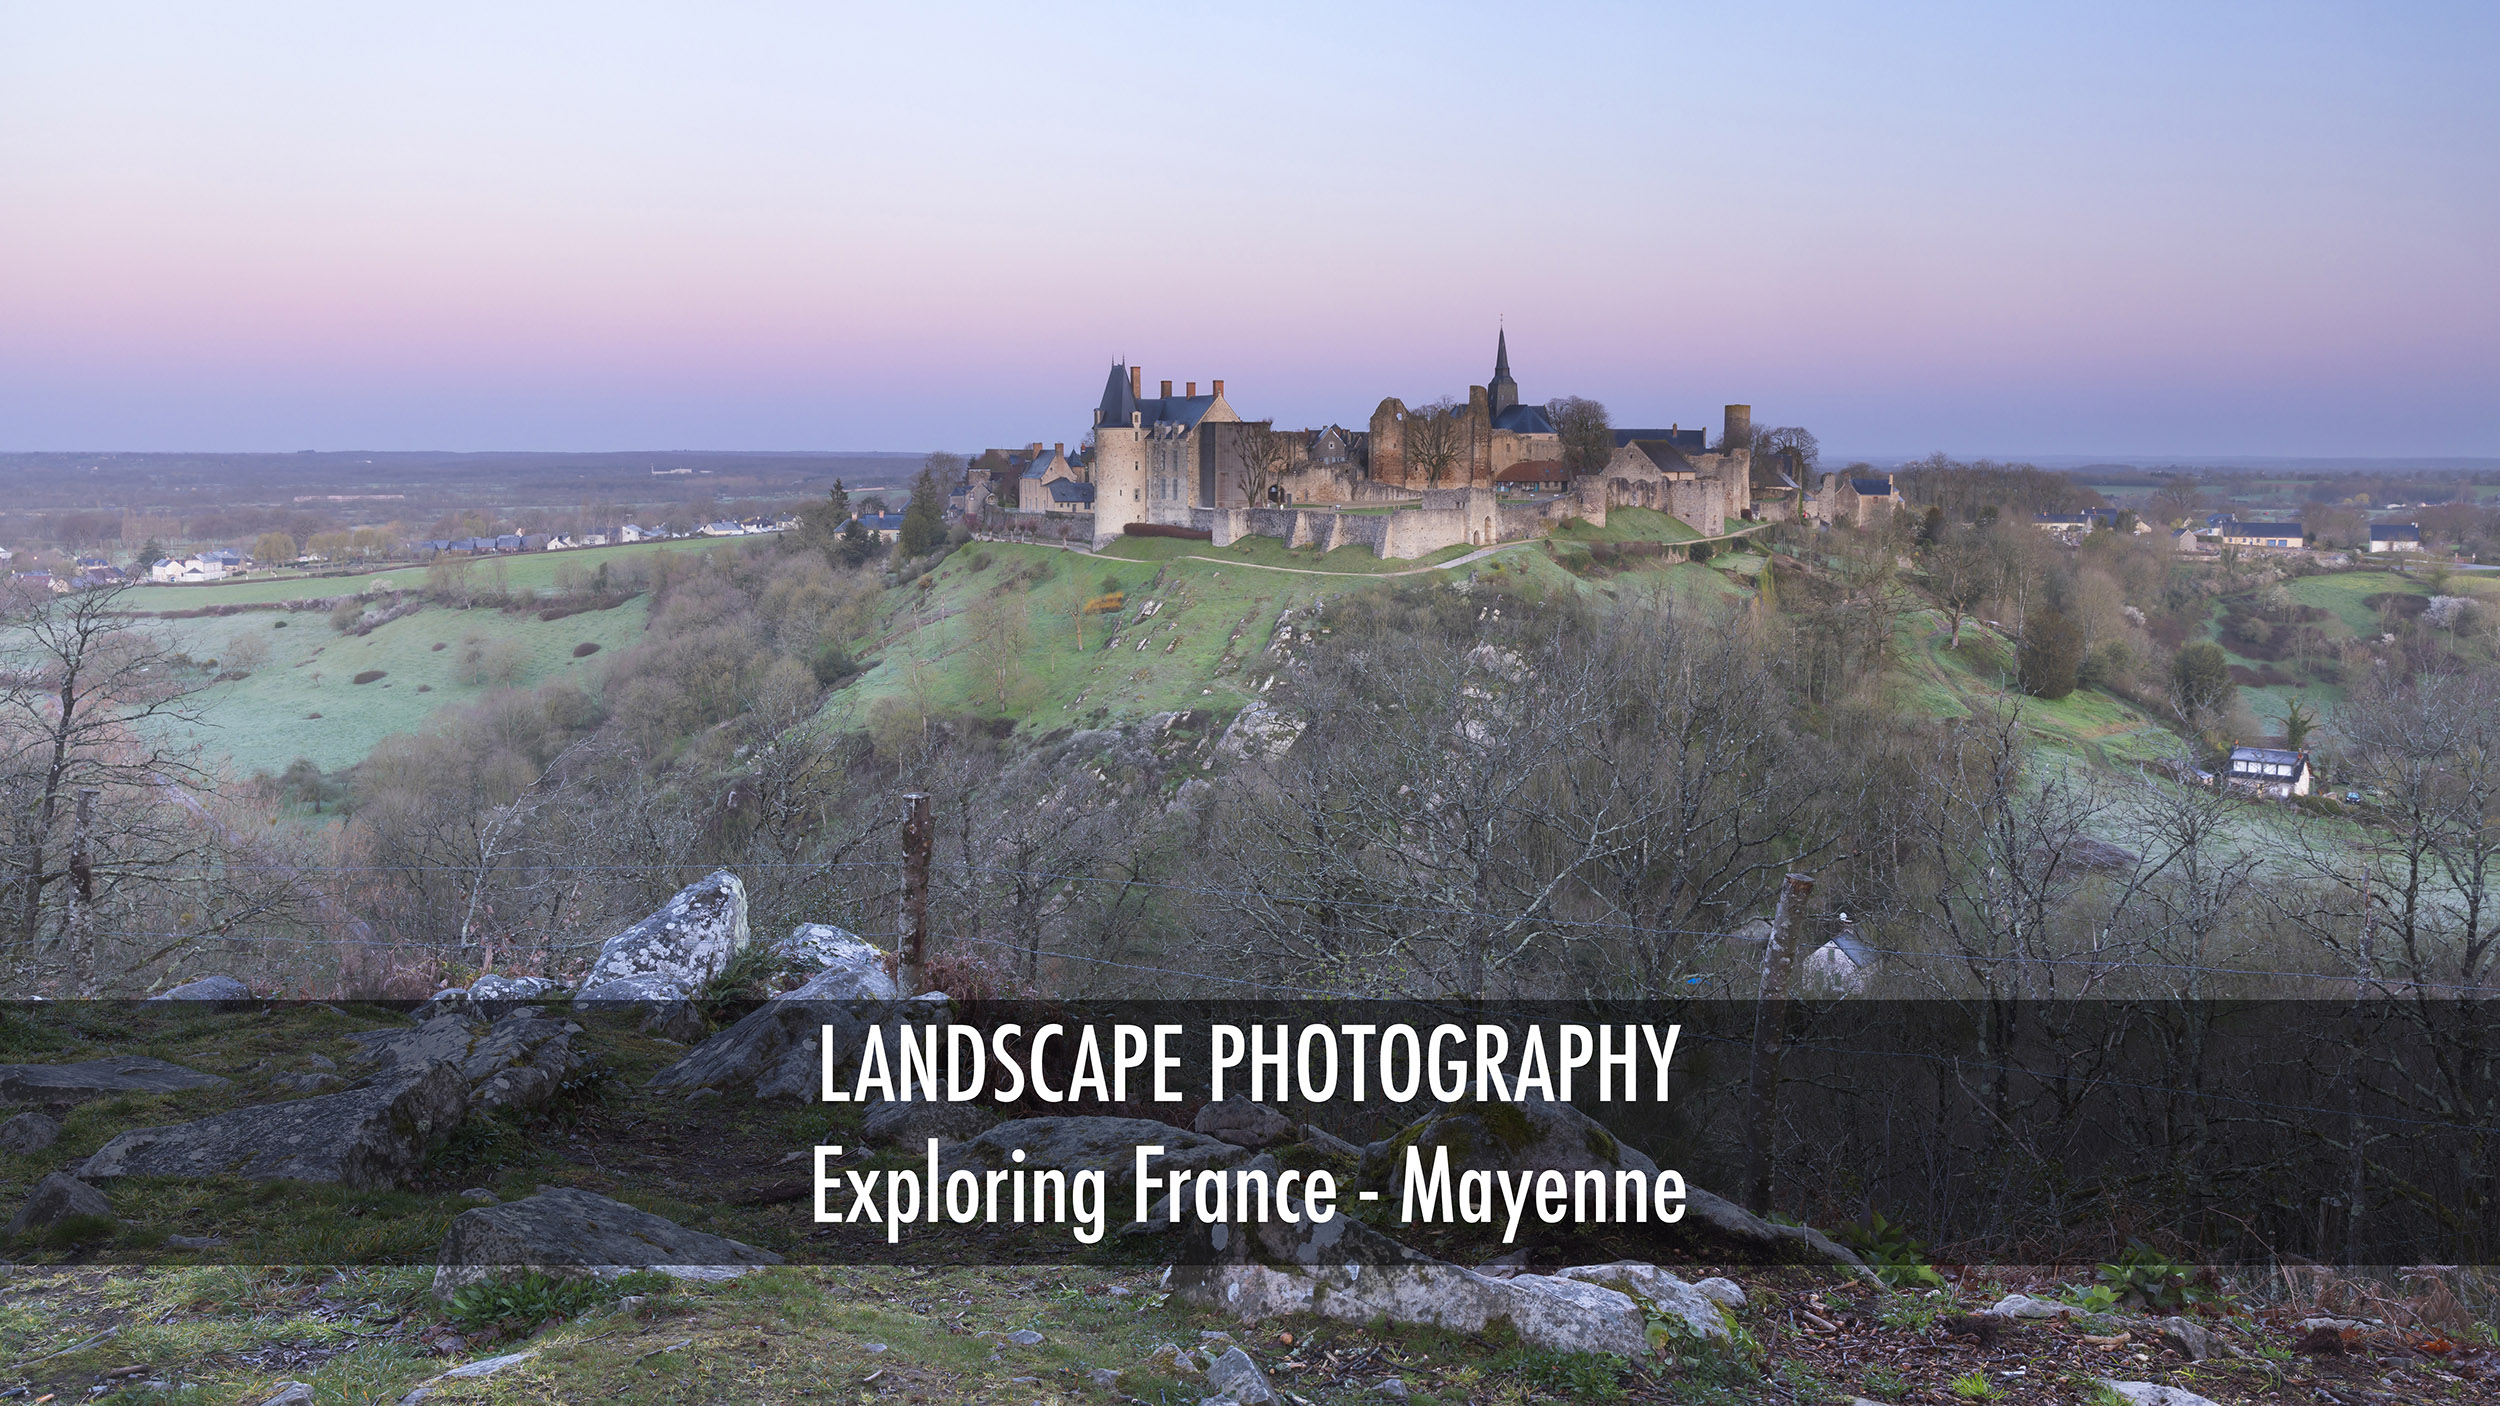 Exploring the department of Mayenne in France. Landscape photography.